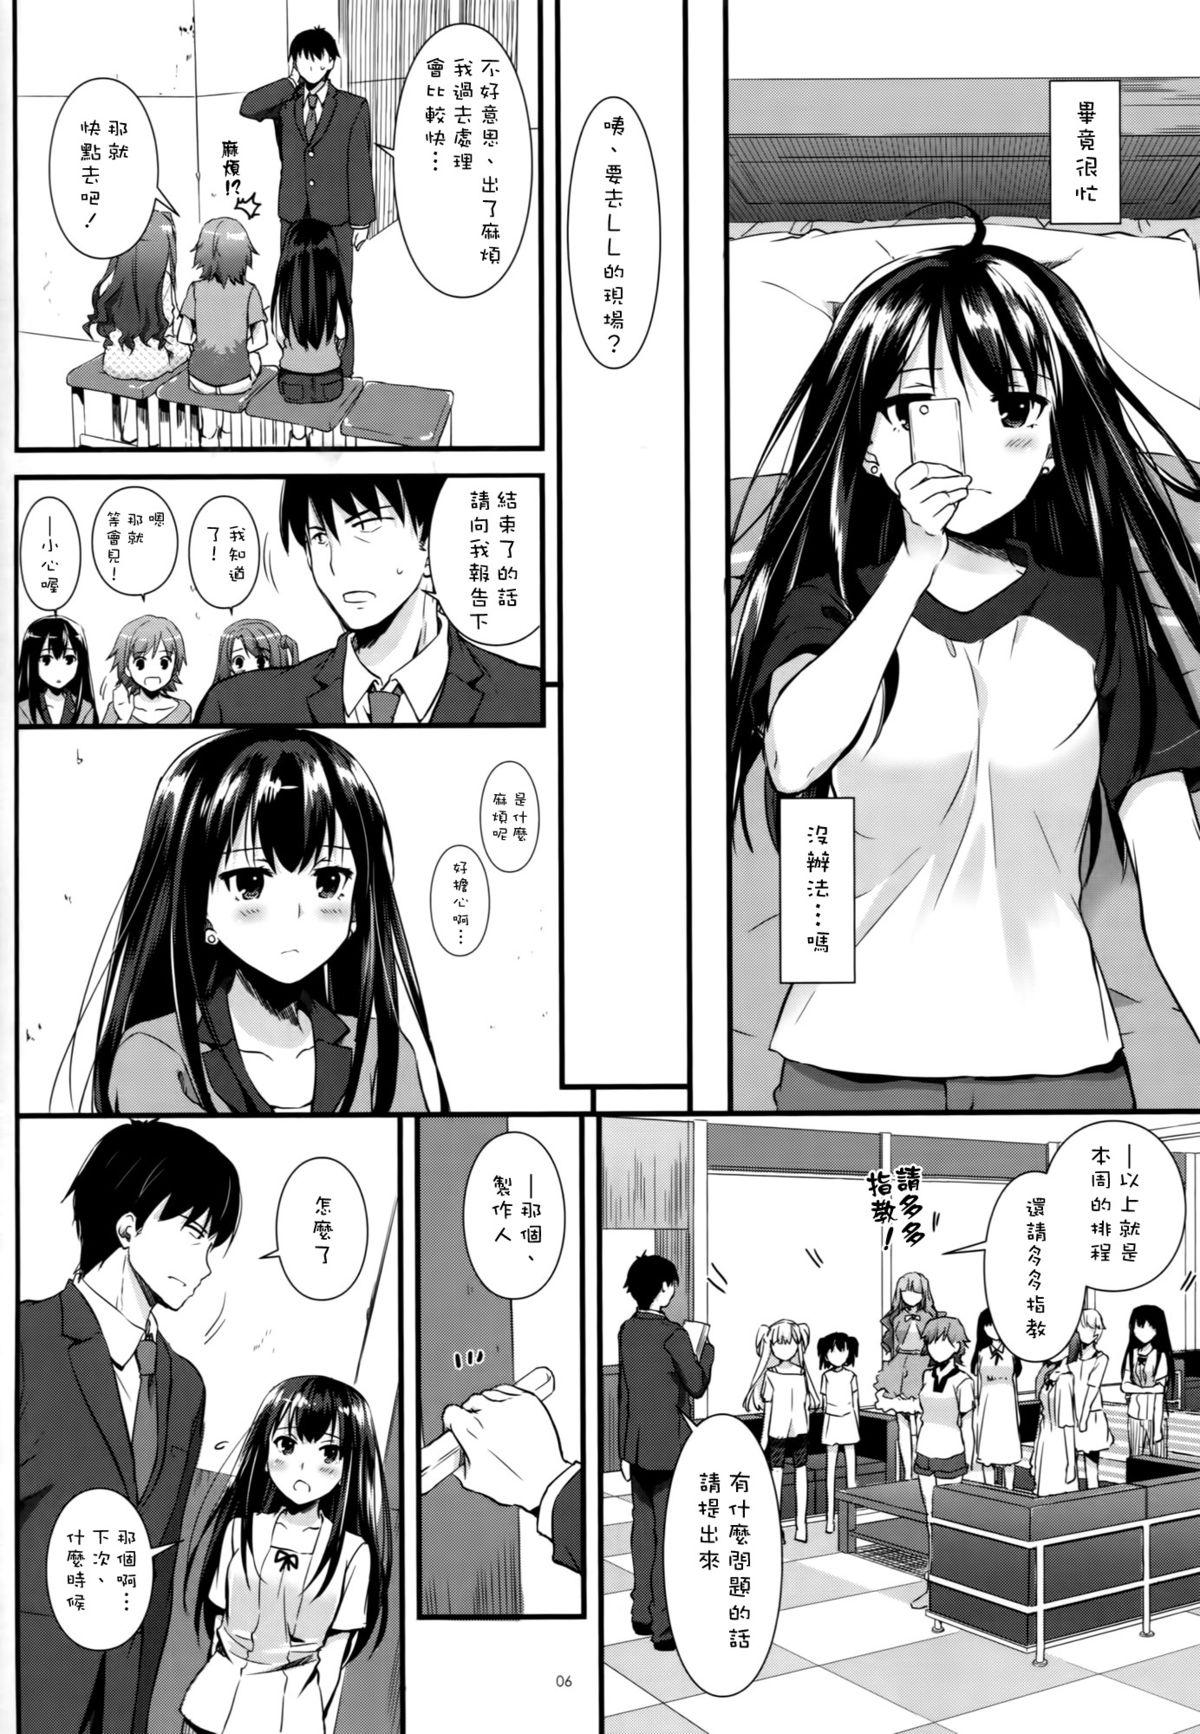 Korea D.L. action 92 - The idolmaster Moms - Page 6